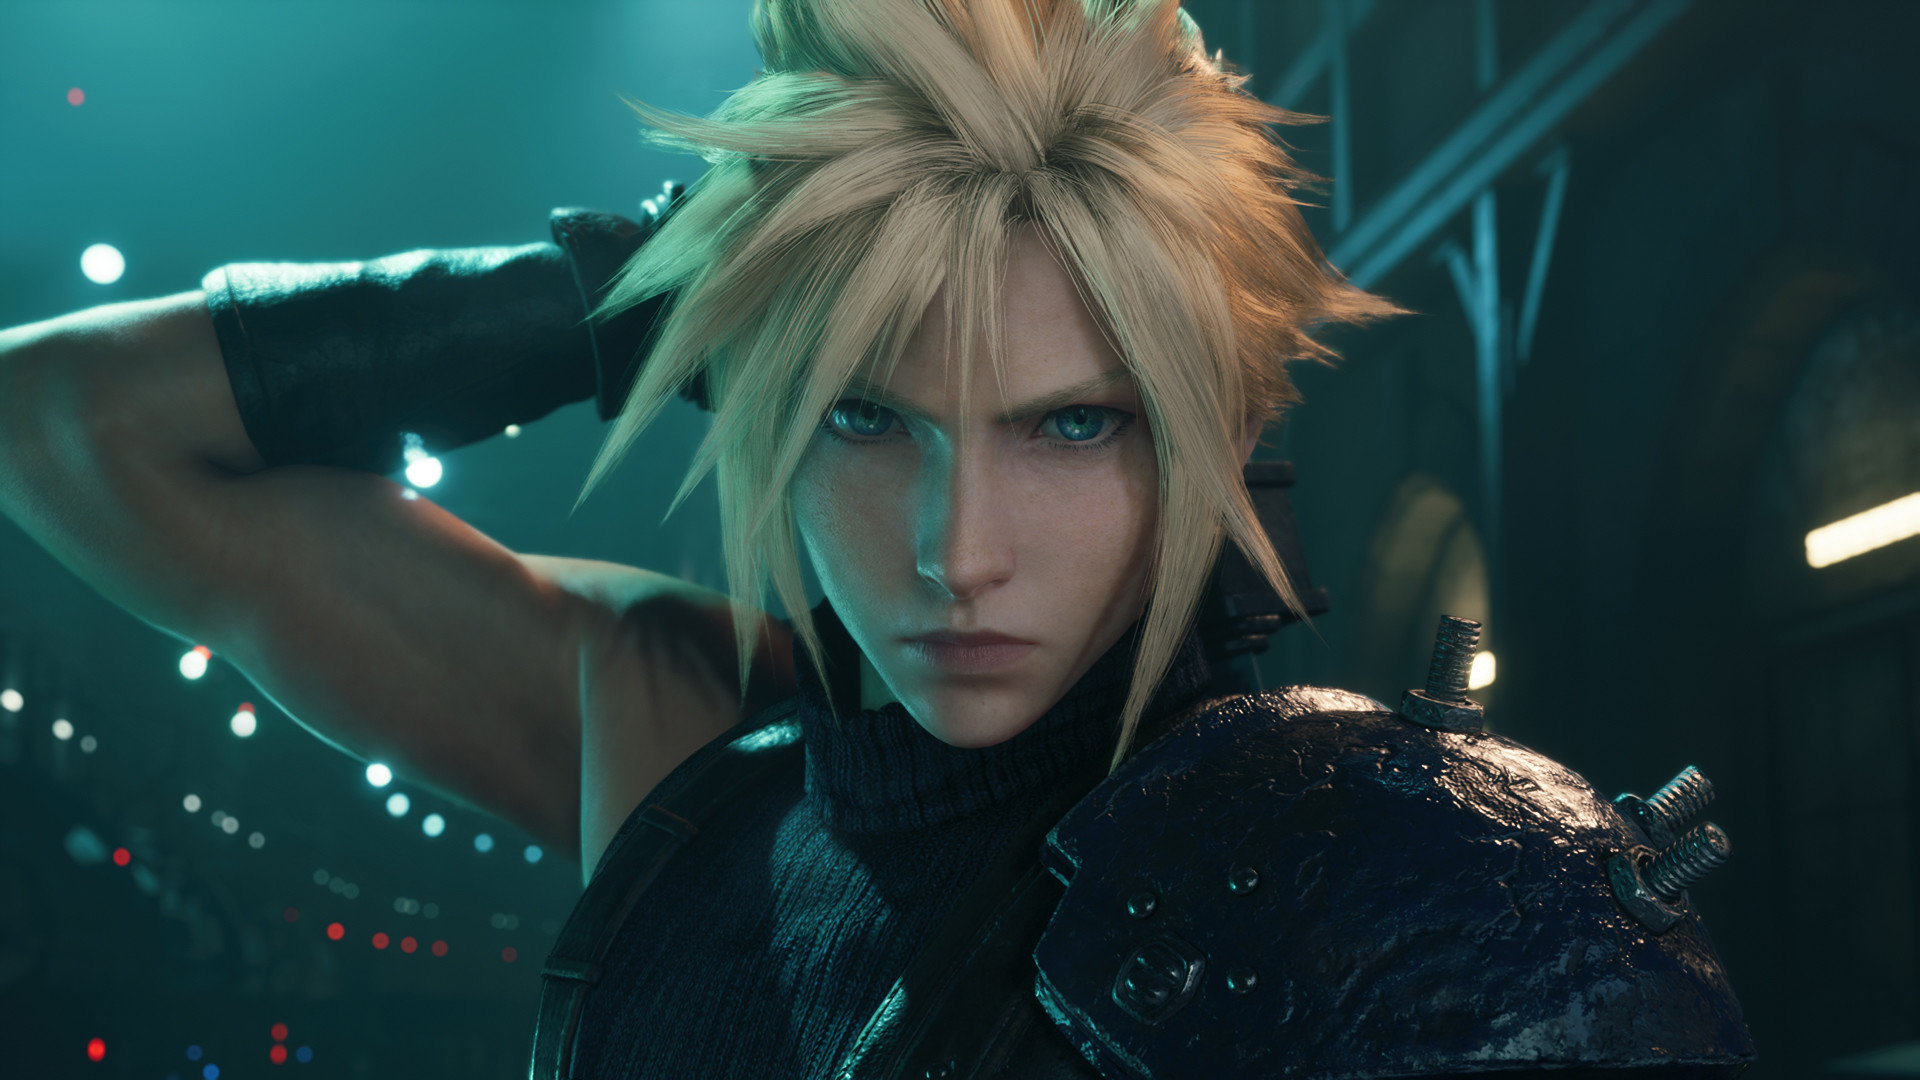 Nervous times ahead for Square Enix employees as it aggressively pursues AI, claiming it will help “reshape” its creations